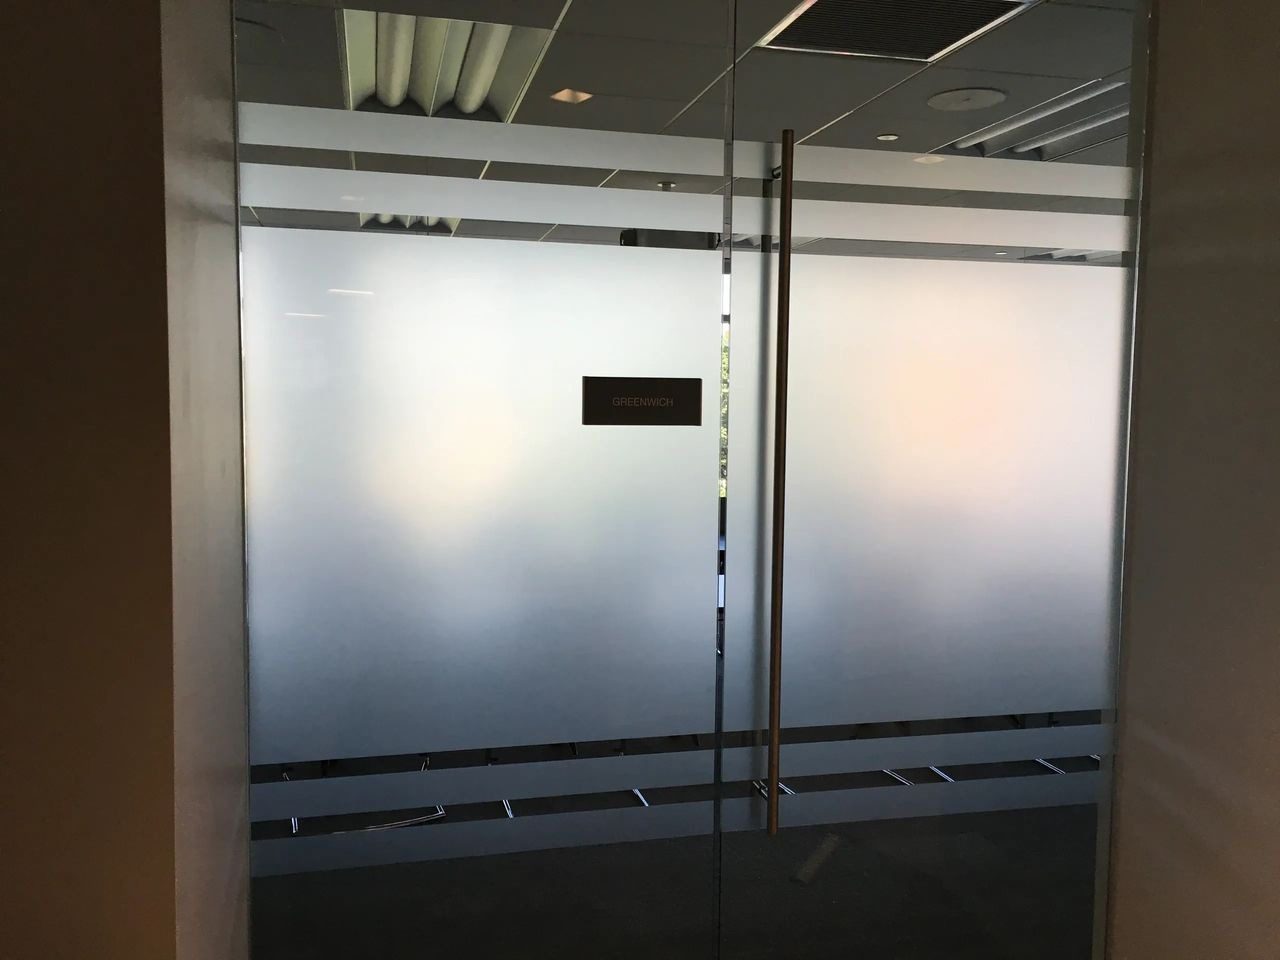 A glass door with a sign on it